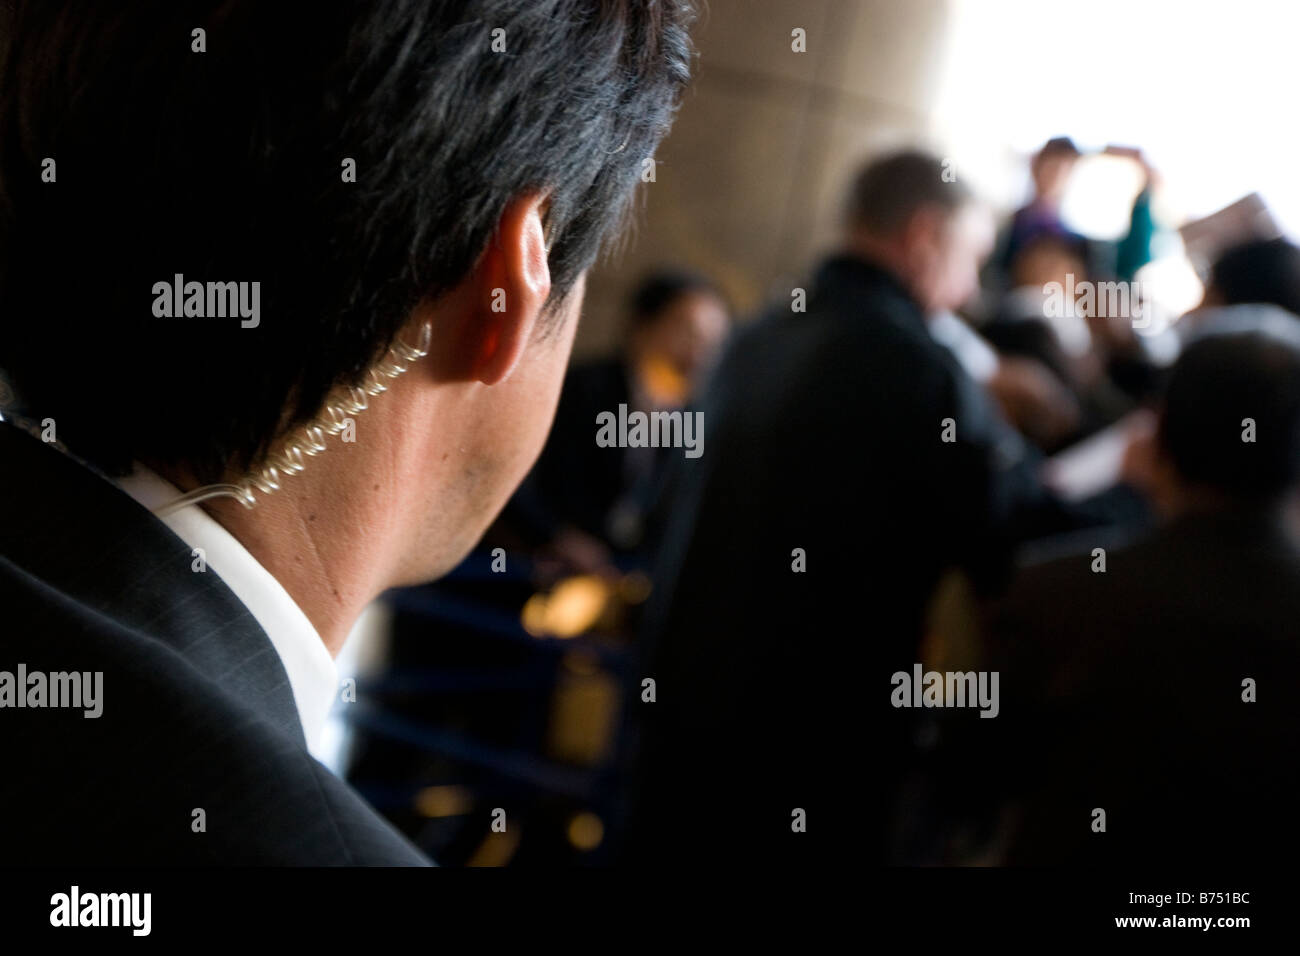 security guard wearing earpiece watching over star celebrity. Stock Photo